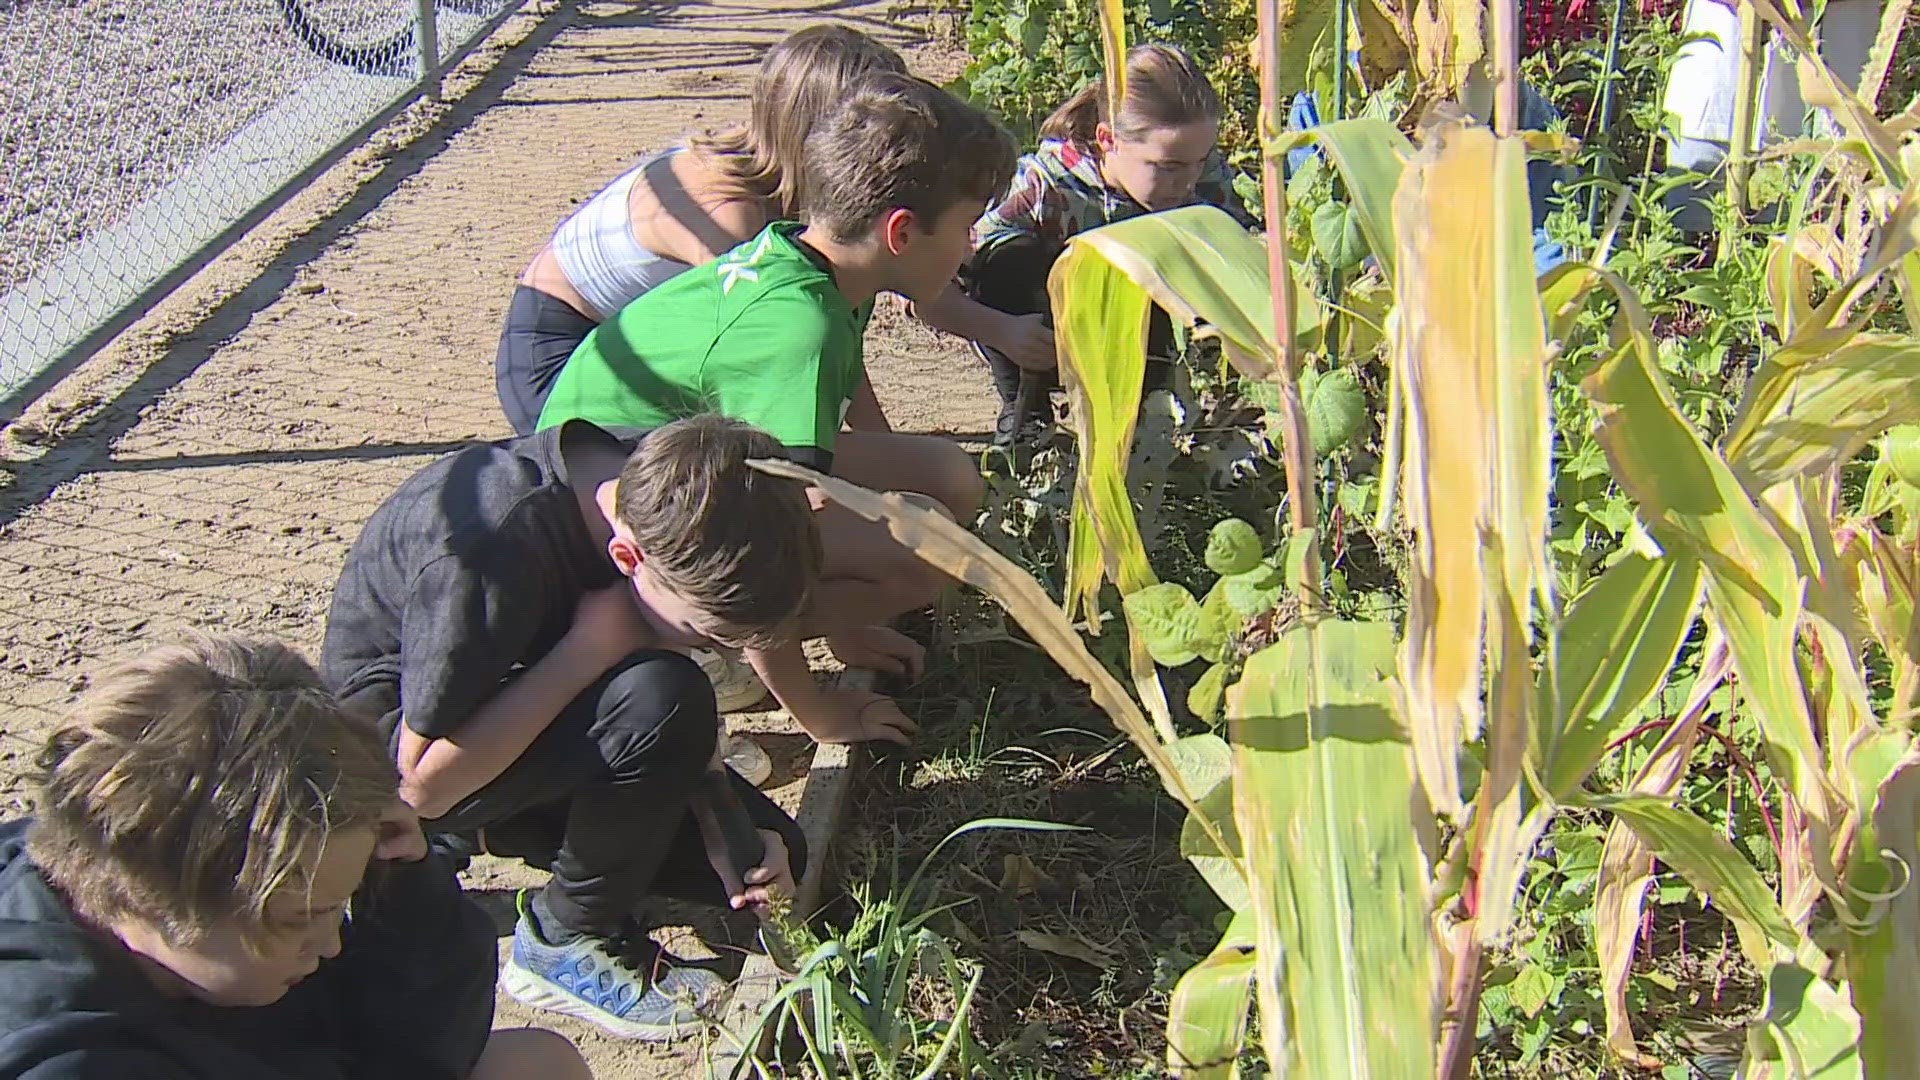 SustainEd Farms works closely with students in over 30 Denver schools to create working farm spaces.